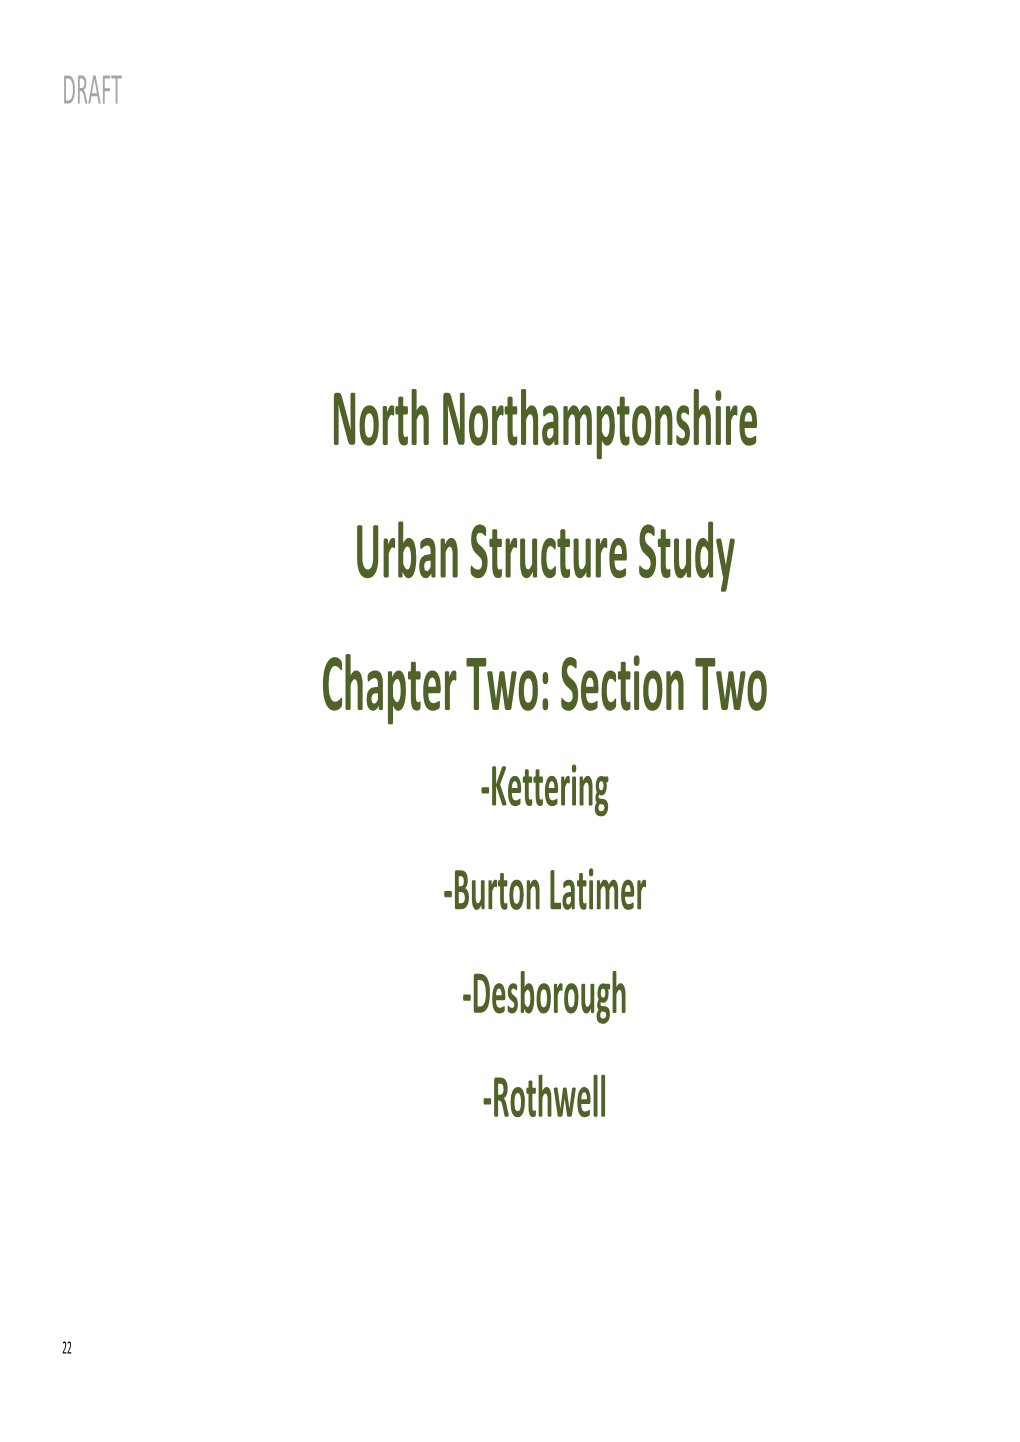 North Northamptonshire Urban Structure Study Chapter Two: Section Two -Kettering -Burton Latimer -Desborough -Rothwell